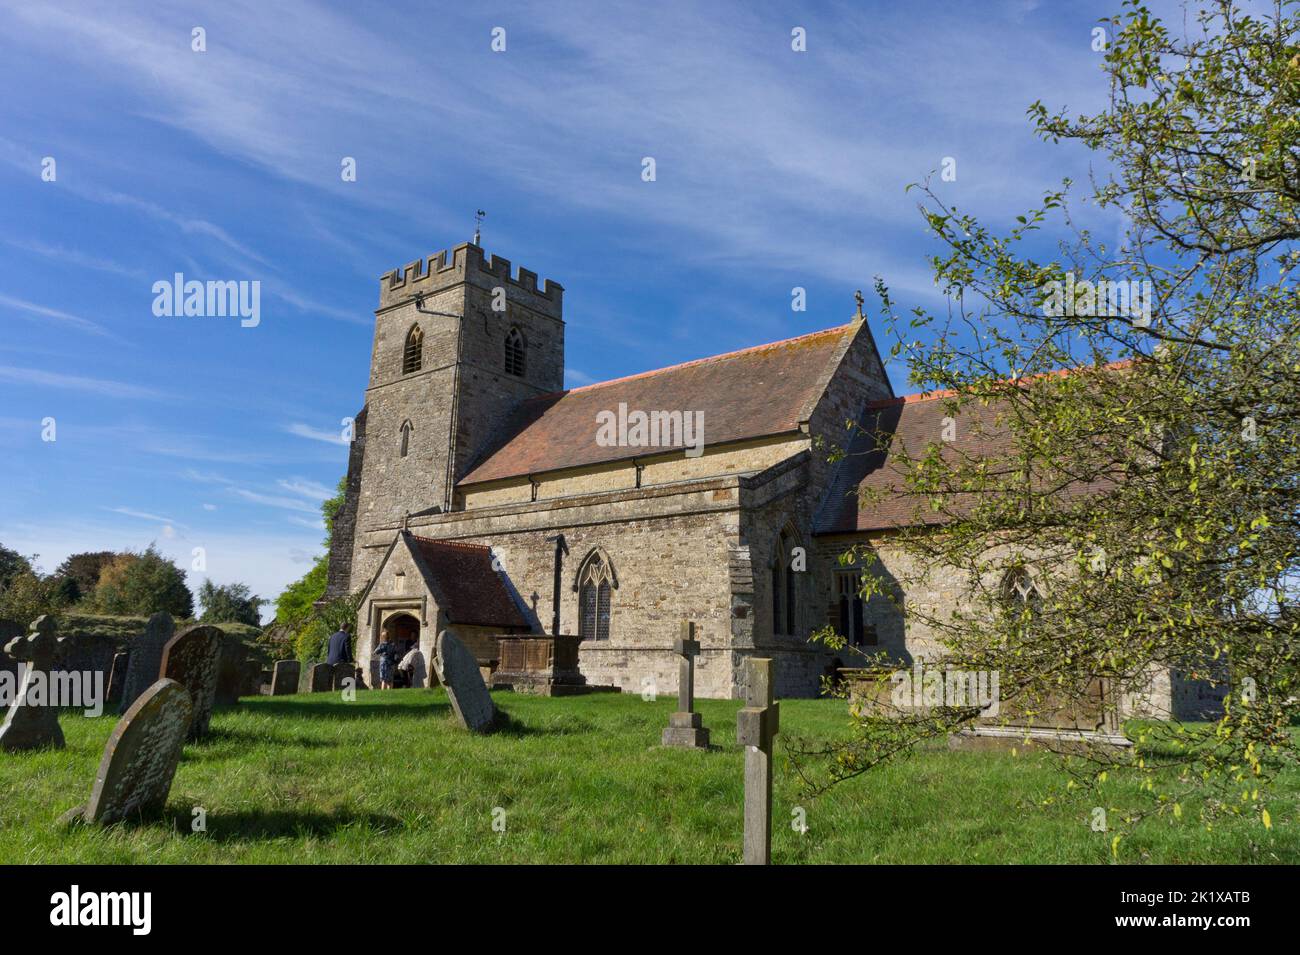 Exterior of the church of St James the Less in the village of Sulgrave, Northamptonshire, UK; earliest parts date from 14th century. Stock Photo